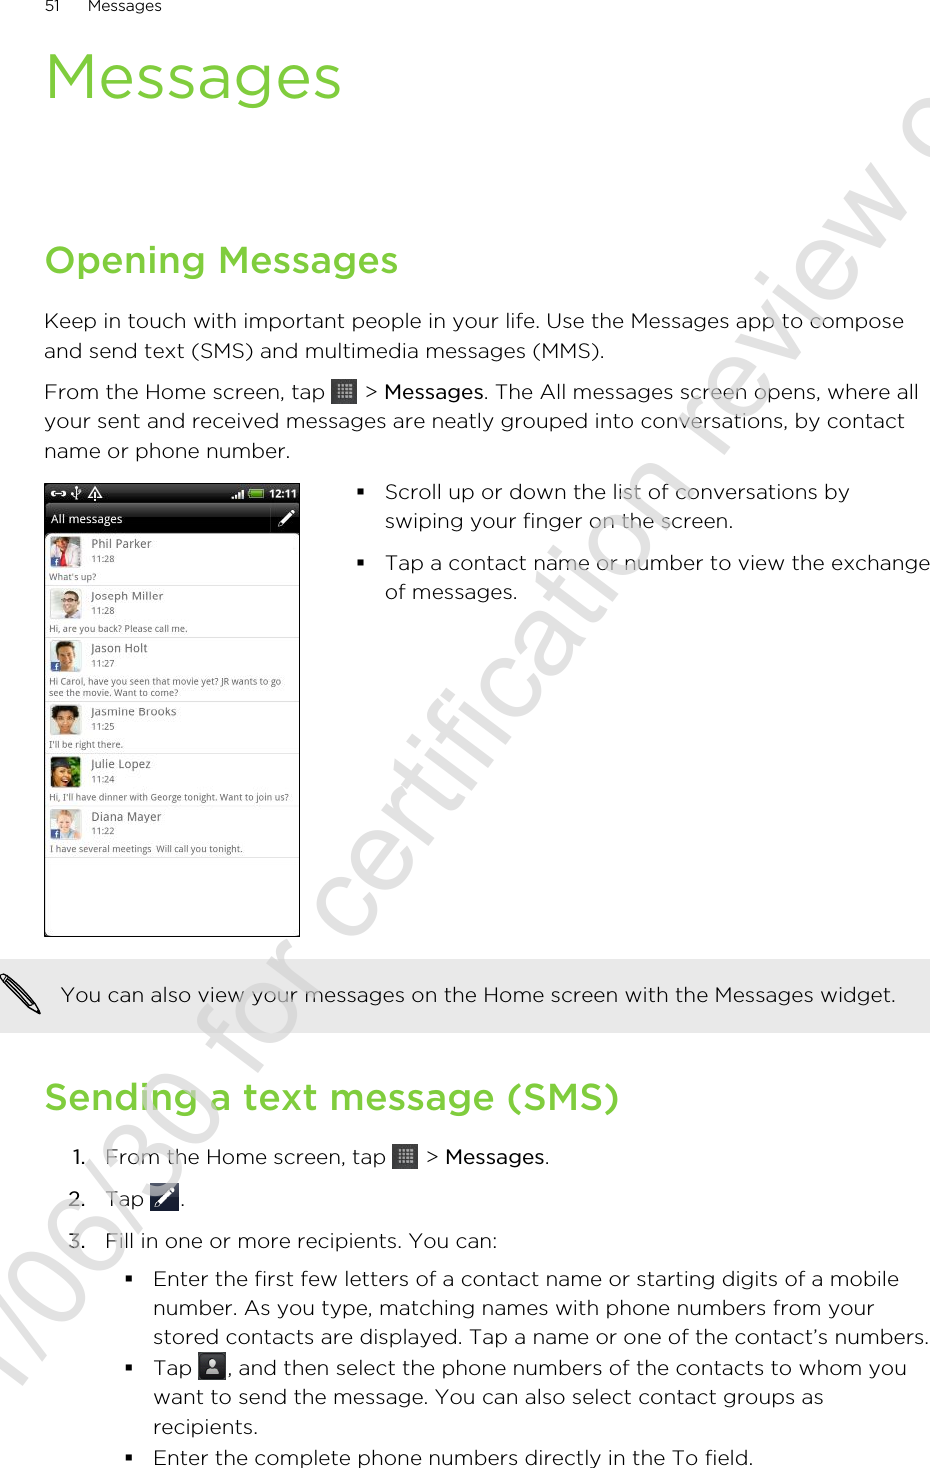 MessagesOpening MessagesKeep in touch with important people in your life. Use the Messages app to composeand send text (SMS) and multimedia messages (MMS).From the Home screen, tap   &gt; Messages. The All messages screen opens, where allyour sent and received messages are neatly grouped into conversations, by contactname or phone number.§Scroll up or down the list of conversations byswiping your finger on the screen.§Tap a contact name or number to view the exchangeof messages.You can also view your messages on the Home screen with the Messages widget.Sending a text message (SMS)1. From the Home screen, tap   &gt; Messages.2. Tap  .3. Fill in one or more recipients. You can:§Enter the first few letters of a contact name or starting digits of a mobilenumber. As you type, matching names with phone numbers from yourstored contacts are displayed. Tap a name or one of the contact’s numbers.§Tap  , and then select the phone numbers of the contacts to whom youwant to send the message. You can also select contact groups asrecipients.§Enter the complete phone numbers directly in the To field.51 Messages2011/06/30 for certification review only